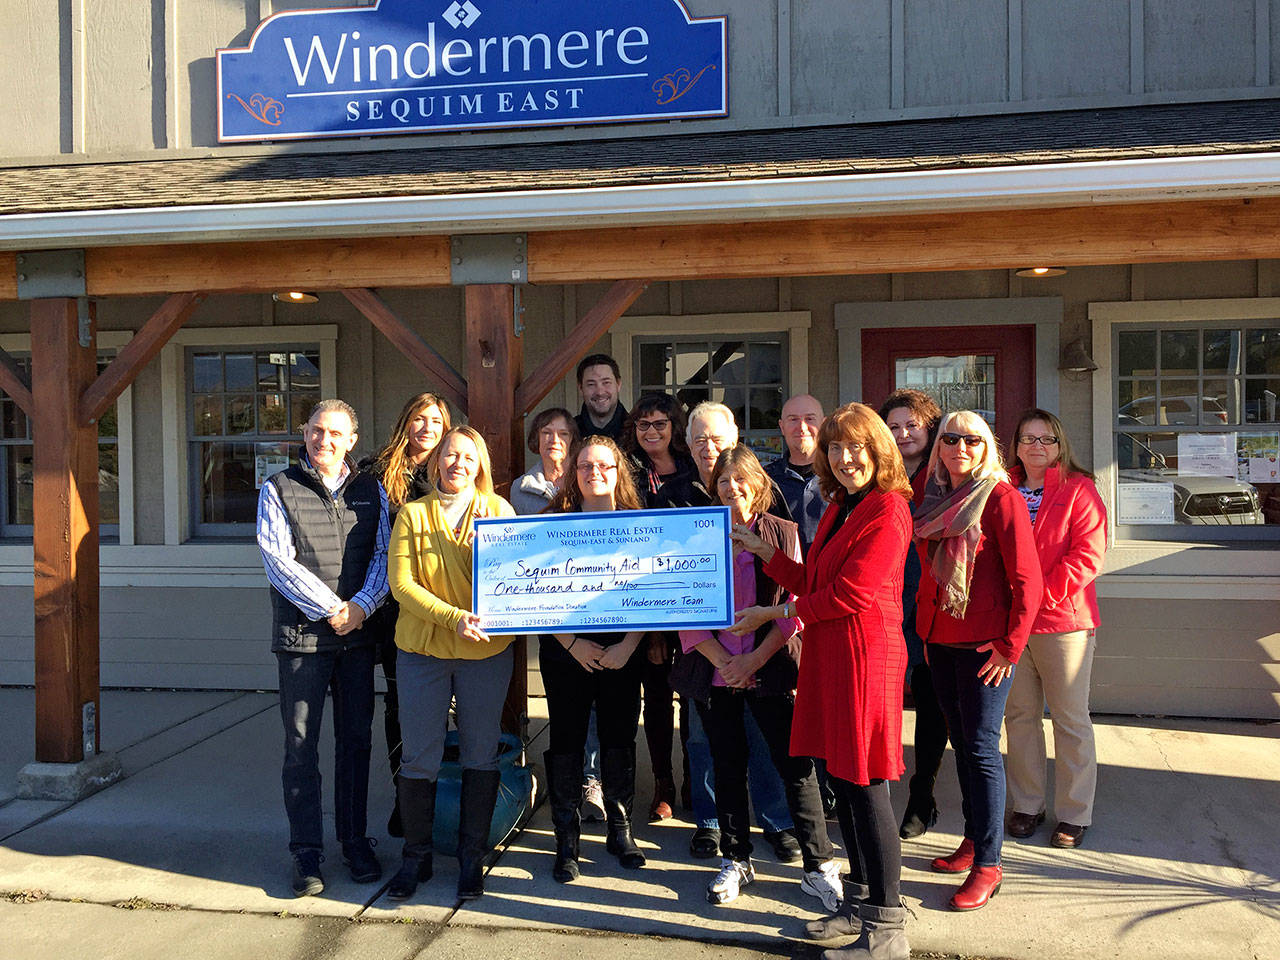 Kathy Suta of Sequim Community Aid accepts a $1,000 donation from Windermere Real Estate brokers in Sequim. Pictured, from left, are Alan Burwell, Kylie Walters, Marcee Medgin, Carol Dana, Jessica Warriner, Andrew Bradshaw, Dianna DaSilva, Dave Sharman, Cathy Reed, Joel Miller, Kathy Suta, Dollie Sparks, Jody McLean and Sheryl Payseno Burley.